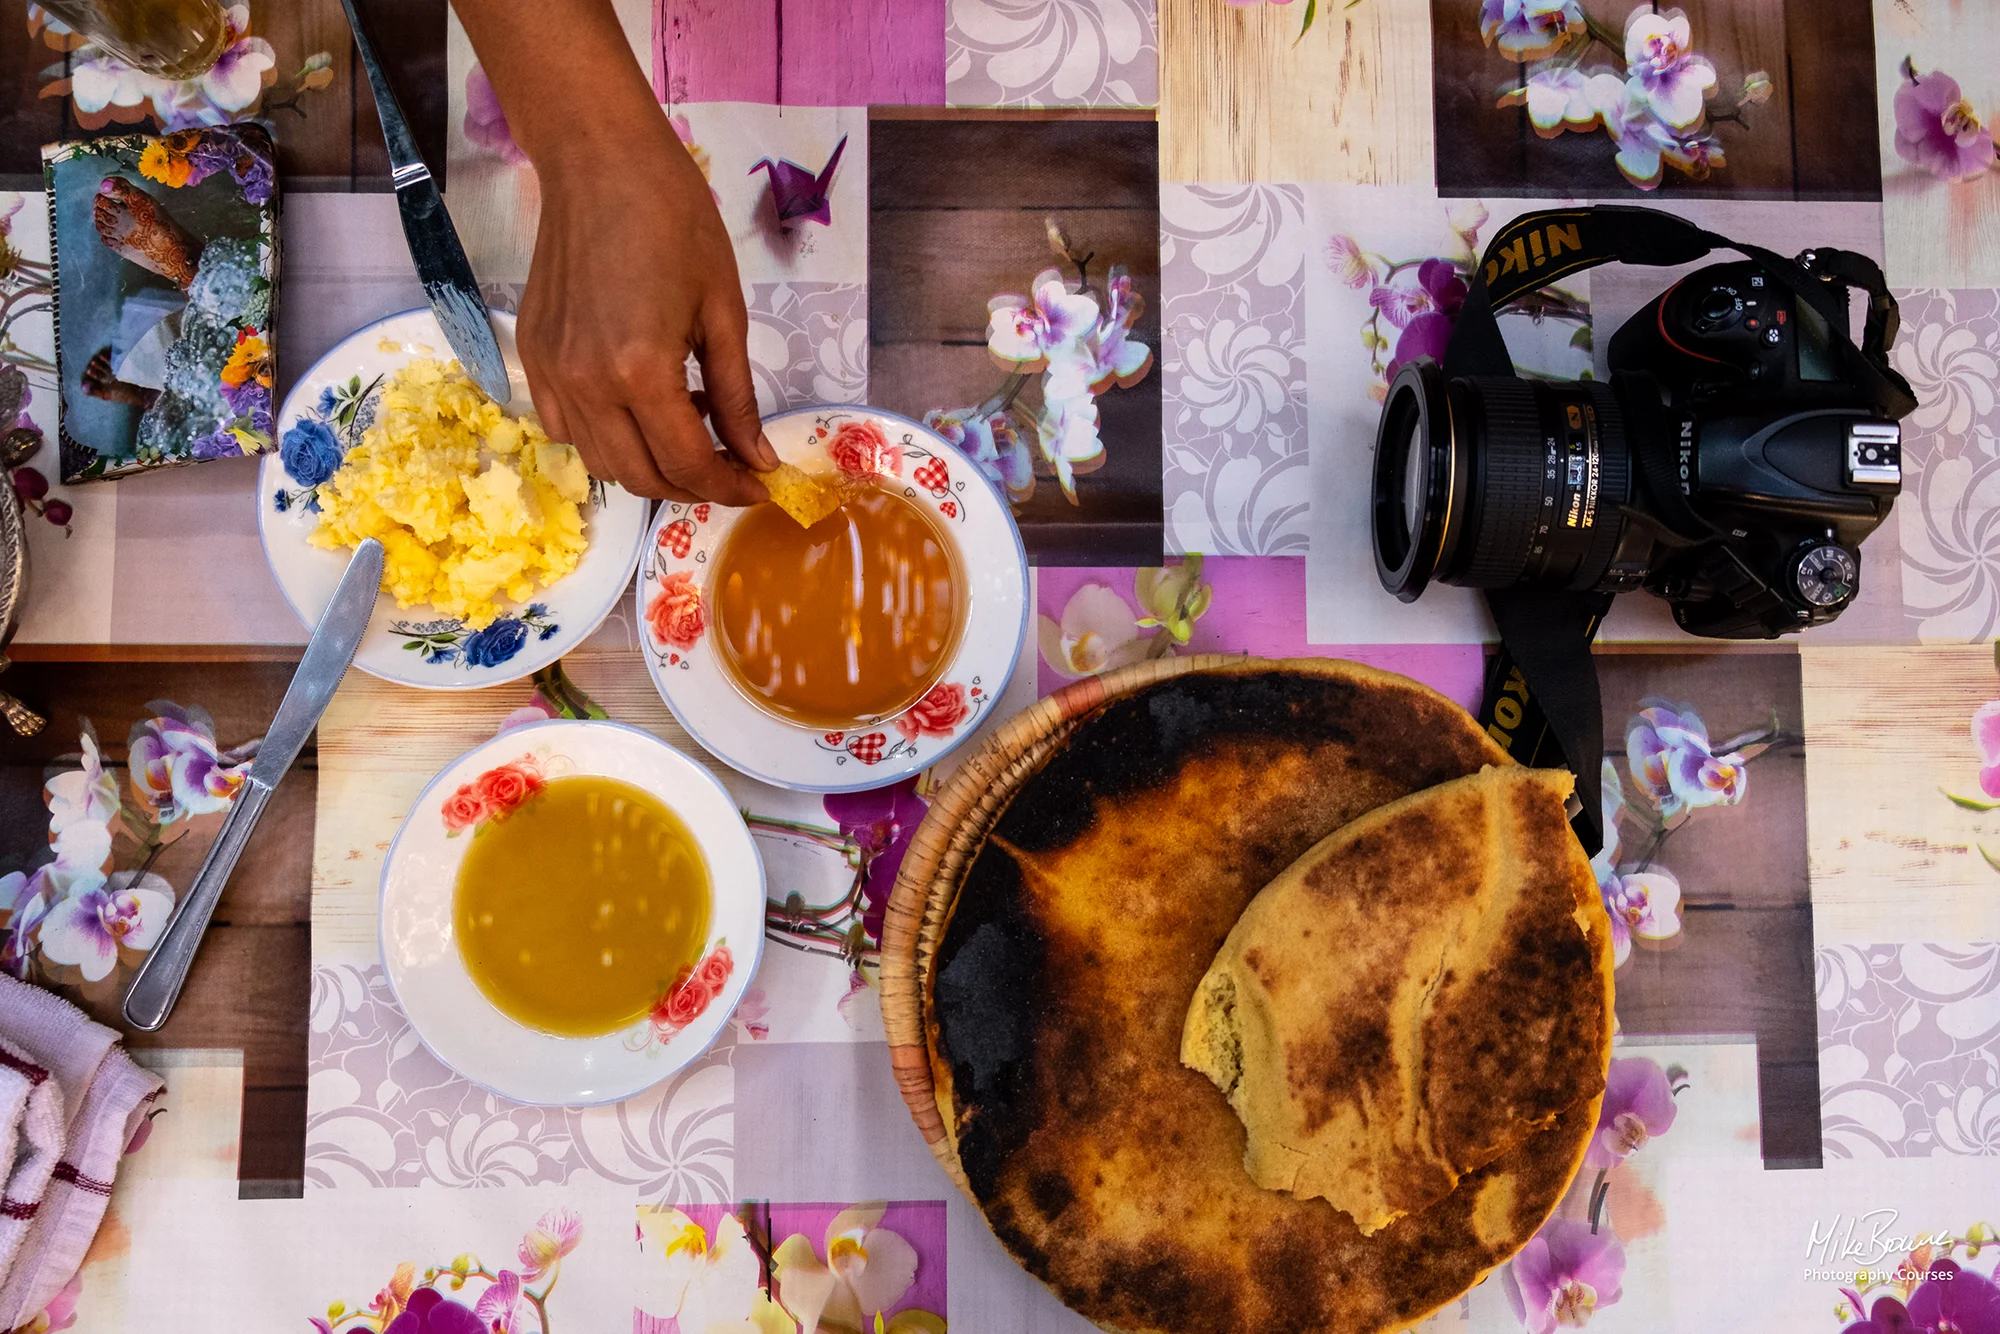 Hand dipping unleavened bread into a bowl of honey and a camera on table